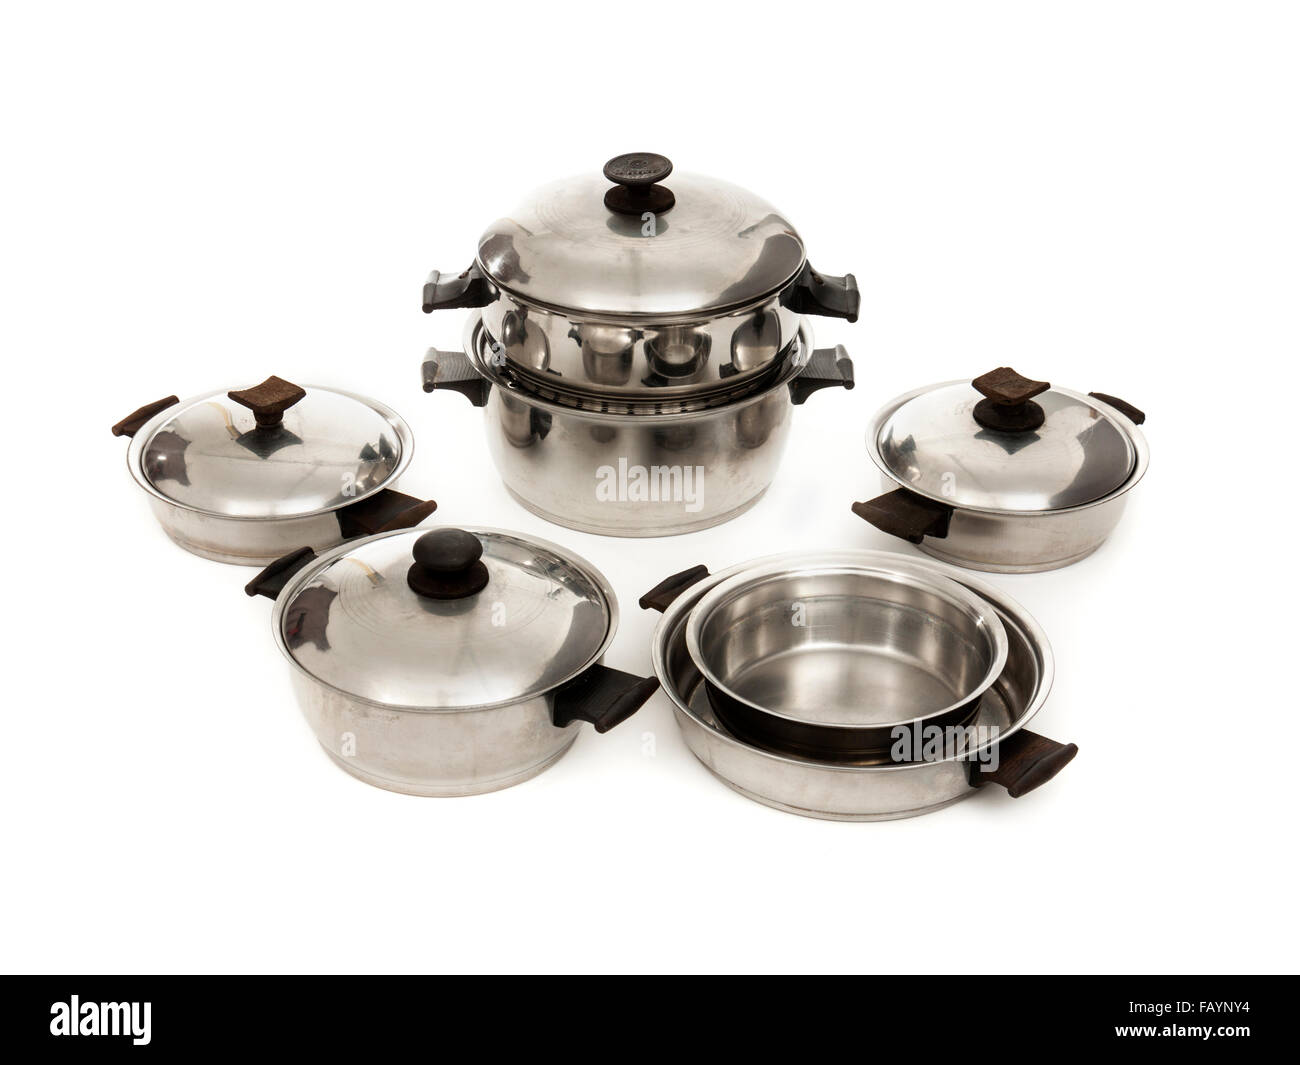 https://c8.alamy.com/comp/FAYNY4/selection-of-rena-ware-waterless-stainless-cookware-FAYNY4.jpg